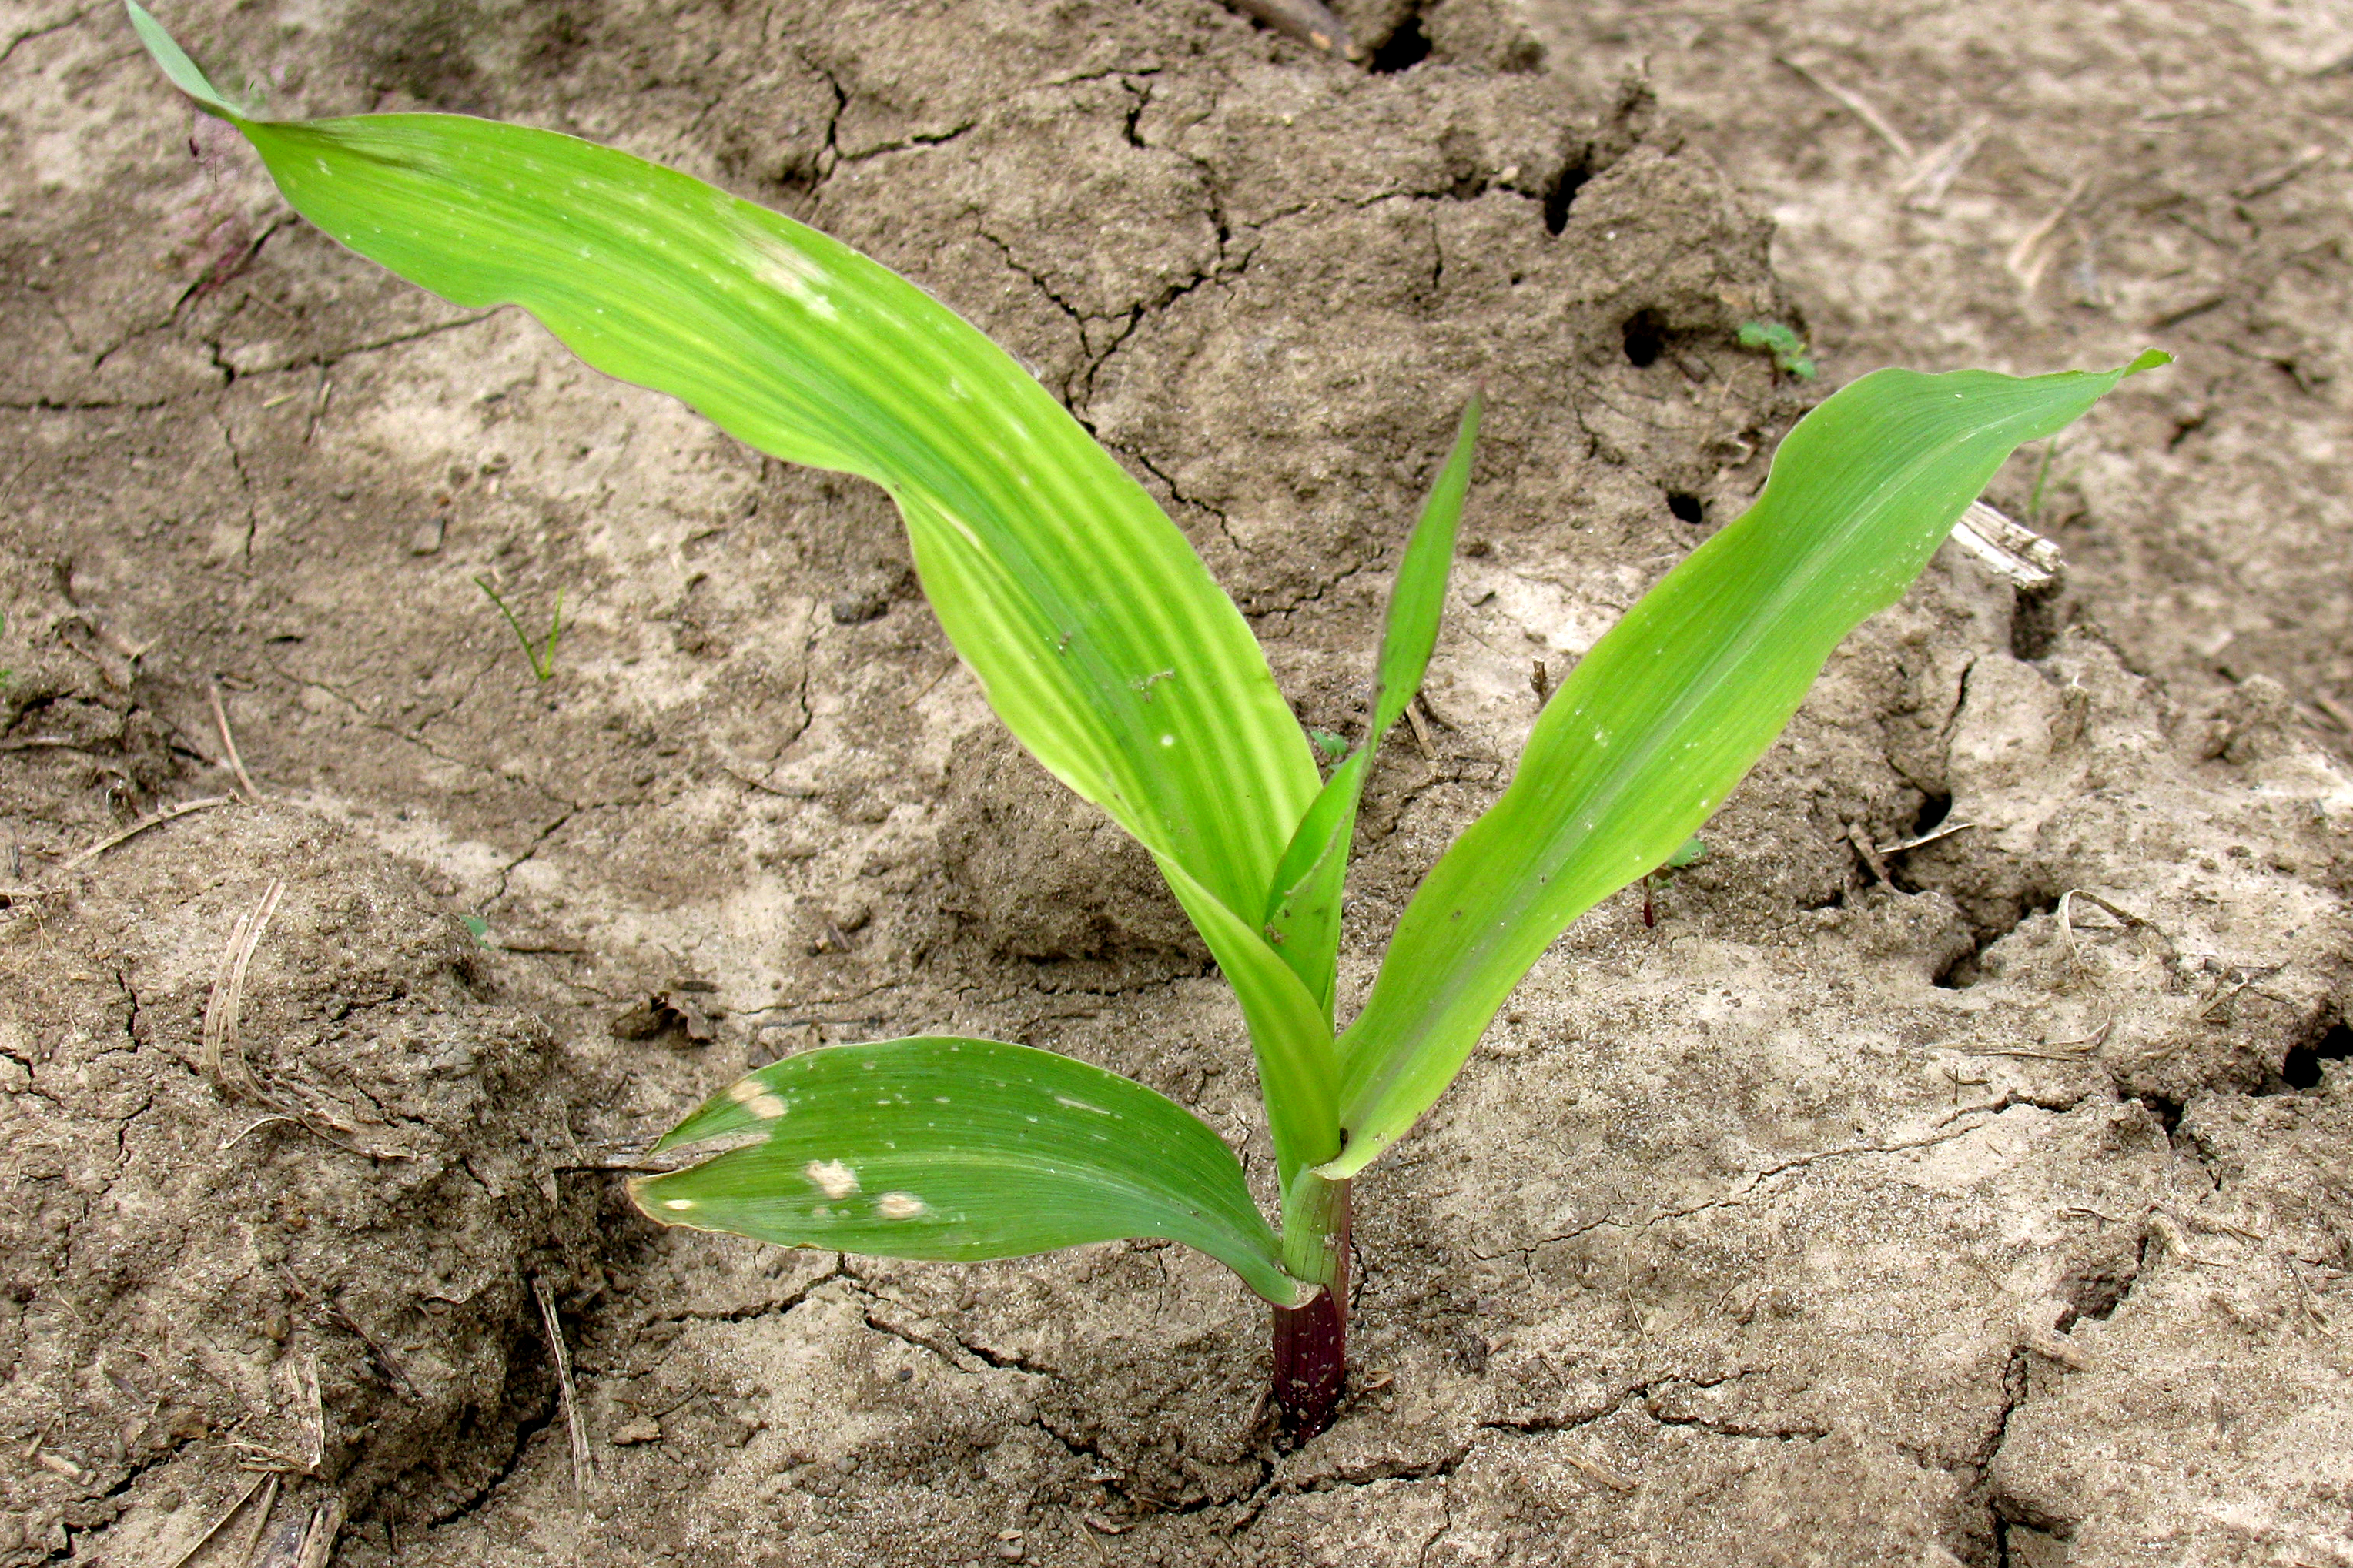 A single, young corn plant with a yellow-and-green striped leaf.